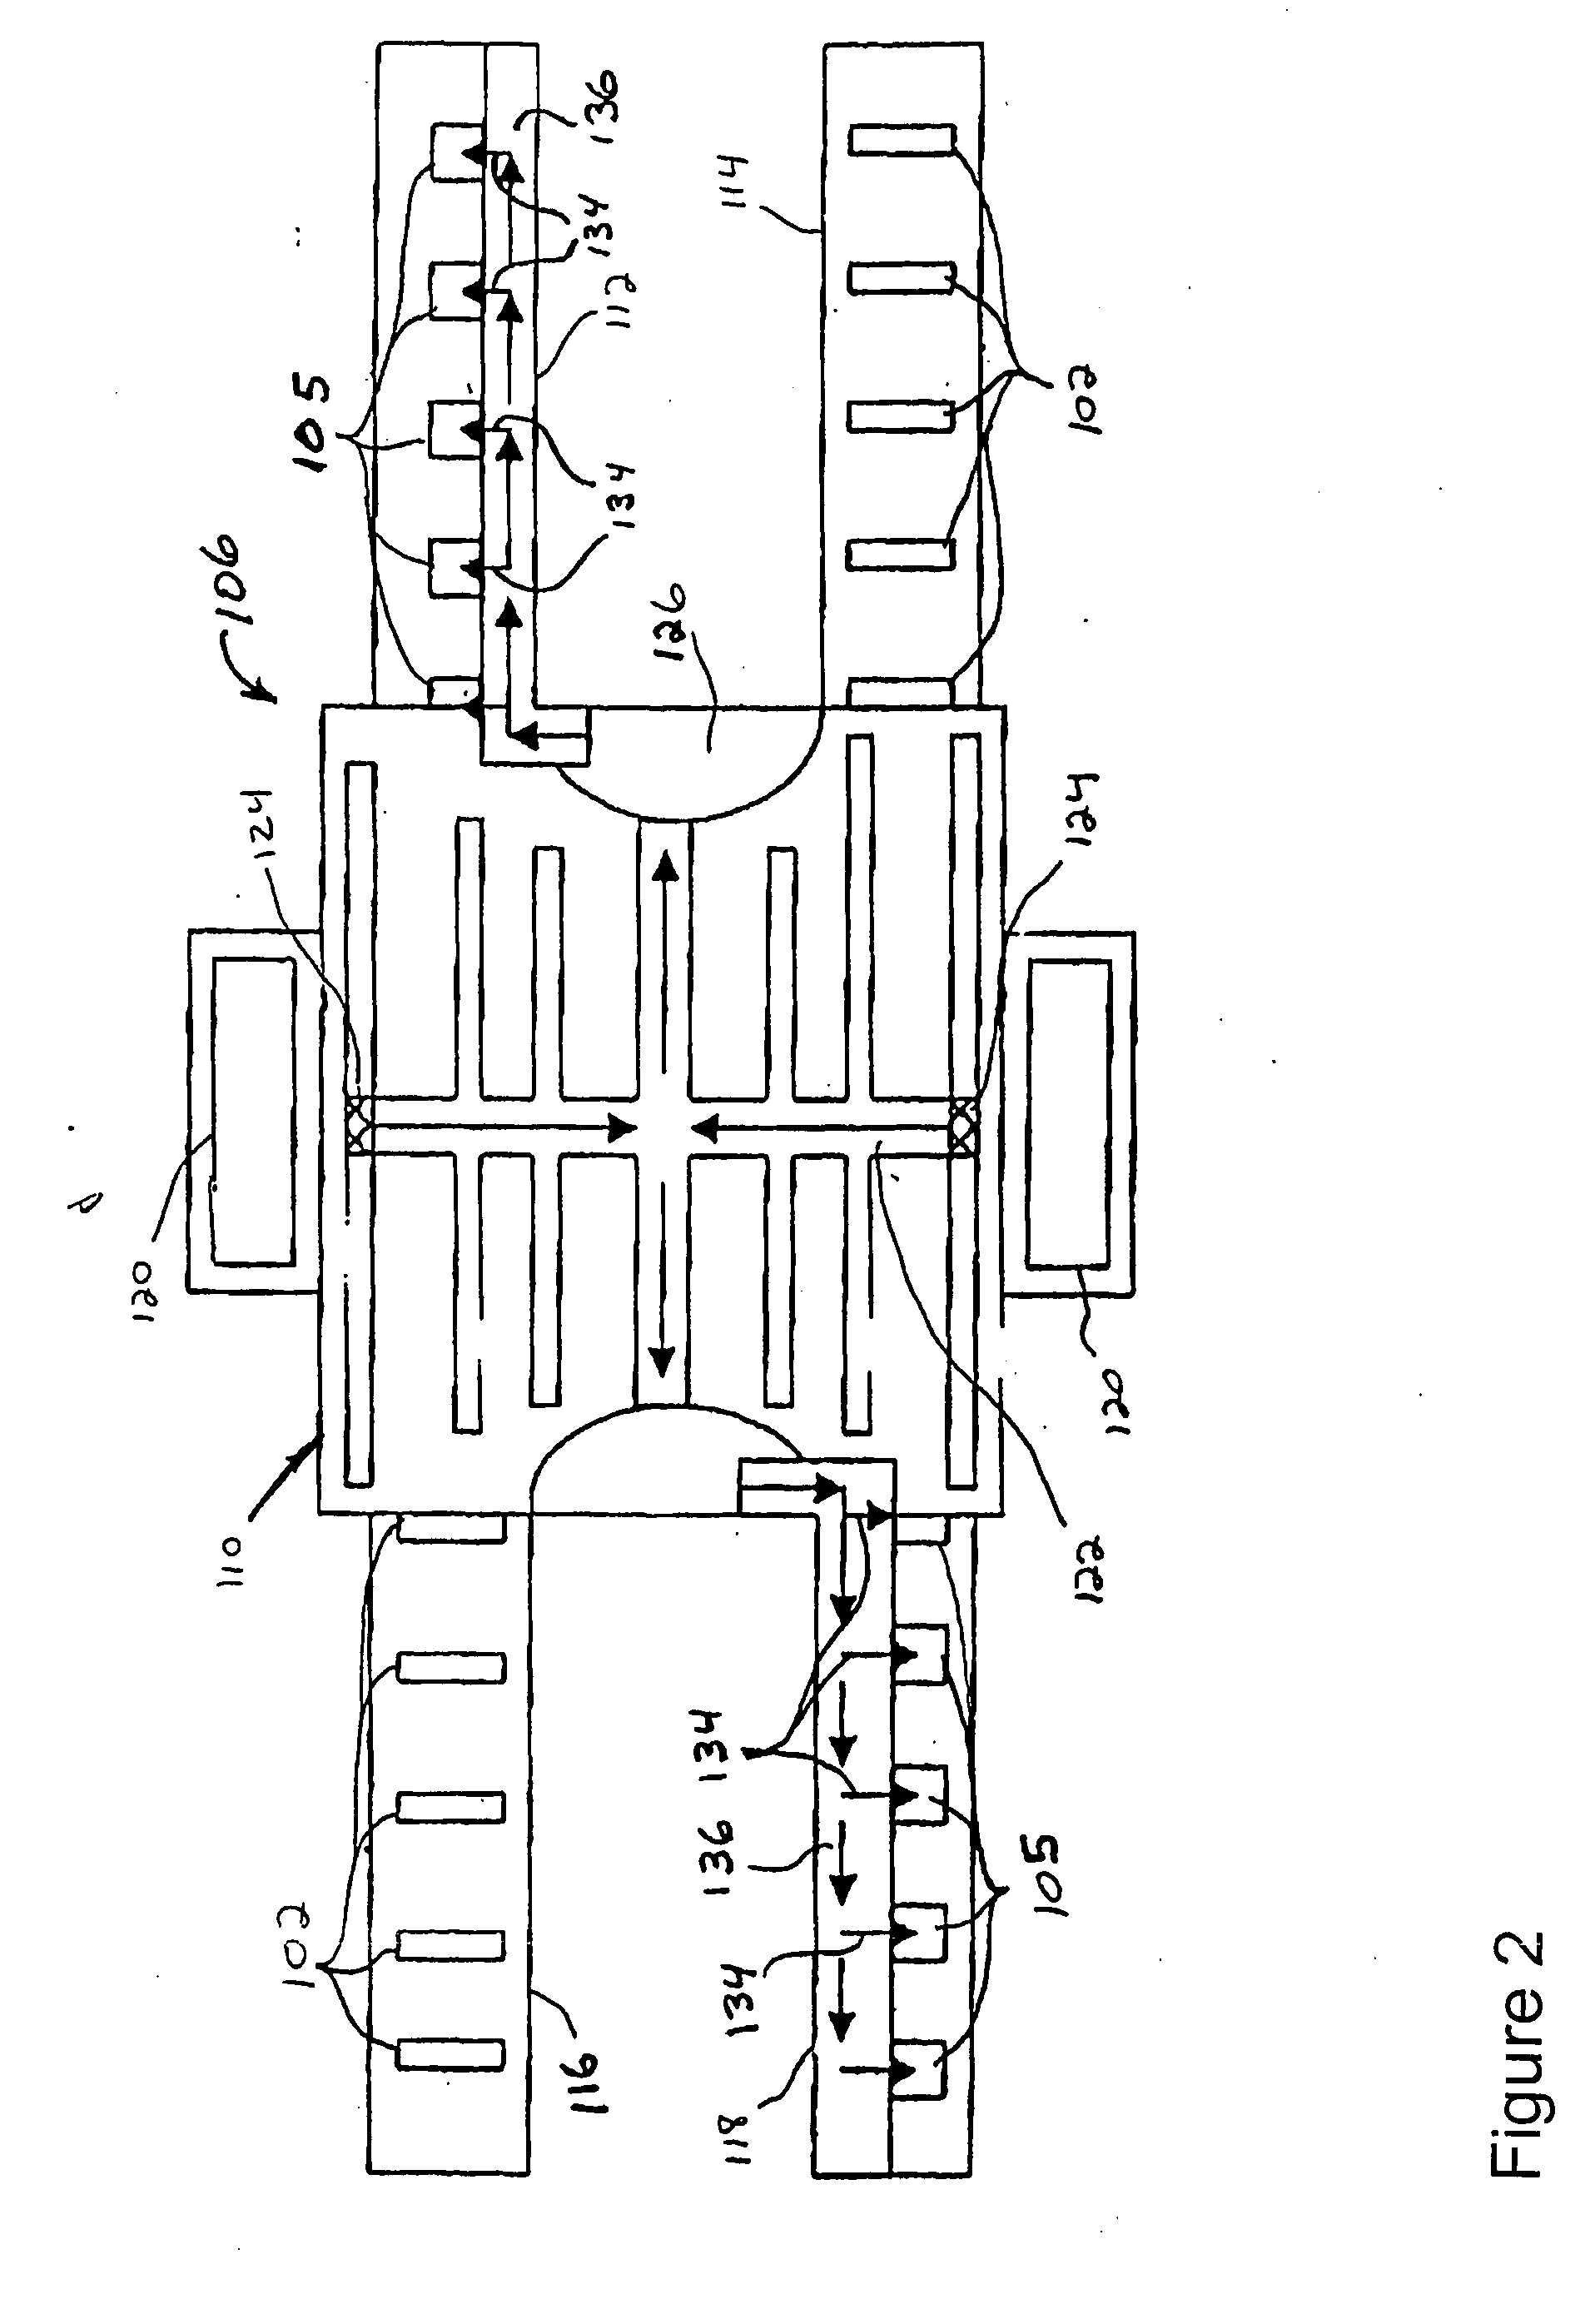 System, method and process for computer controlled delivery of classified goods and services through an amalgamated drive-thru complex